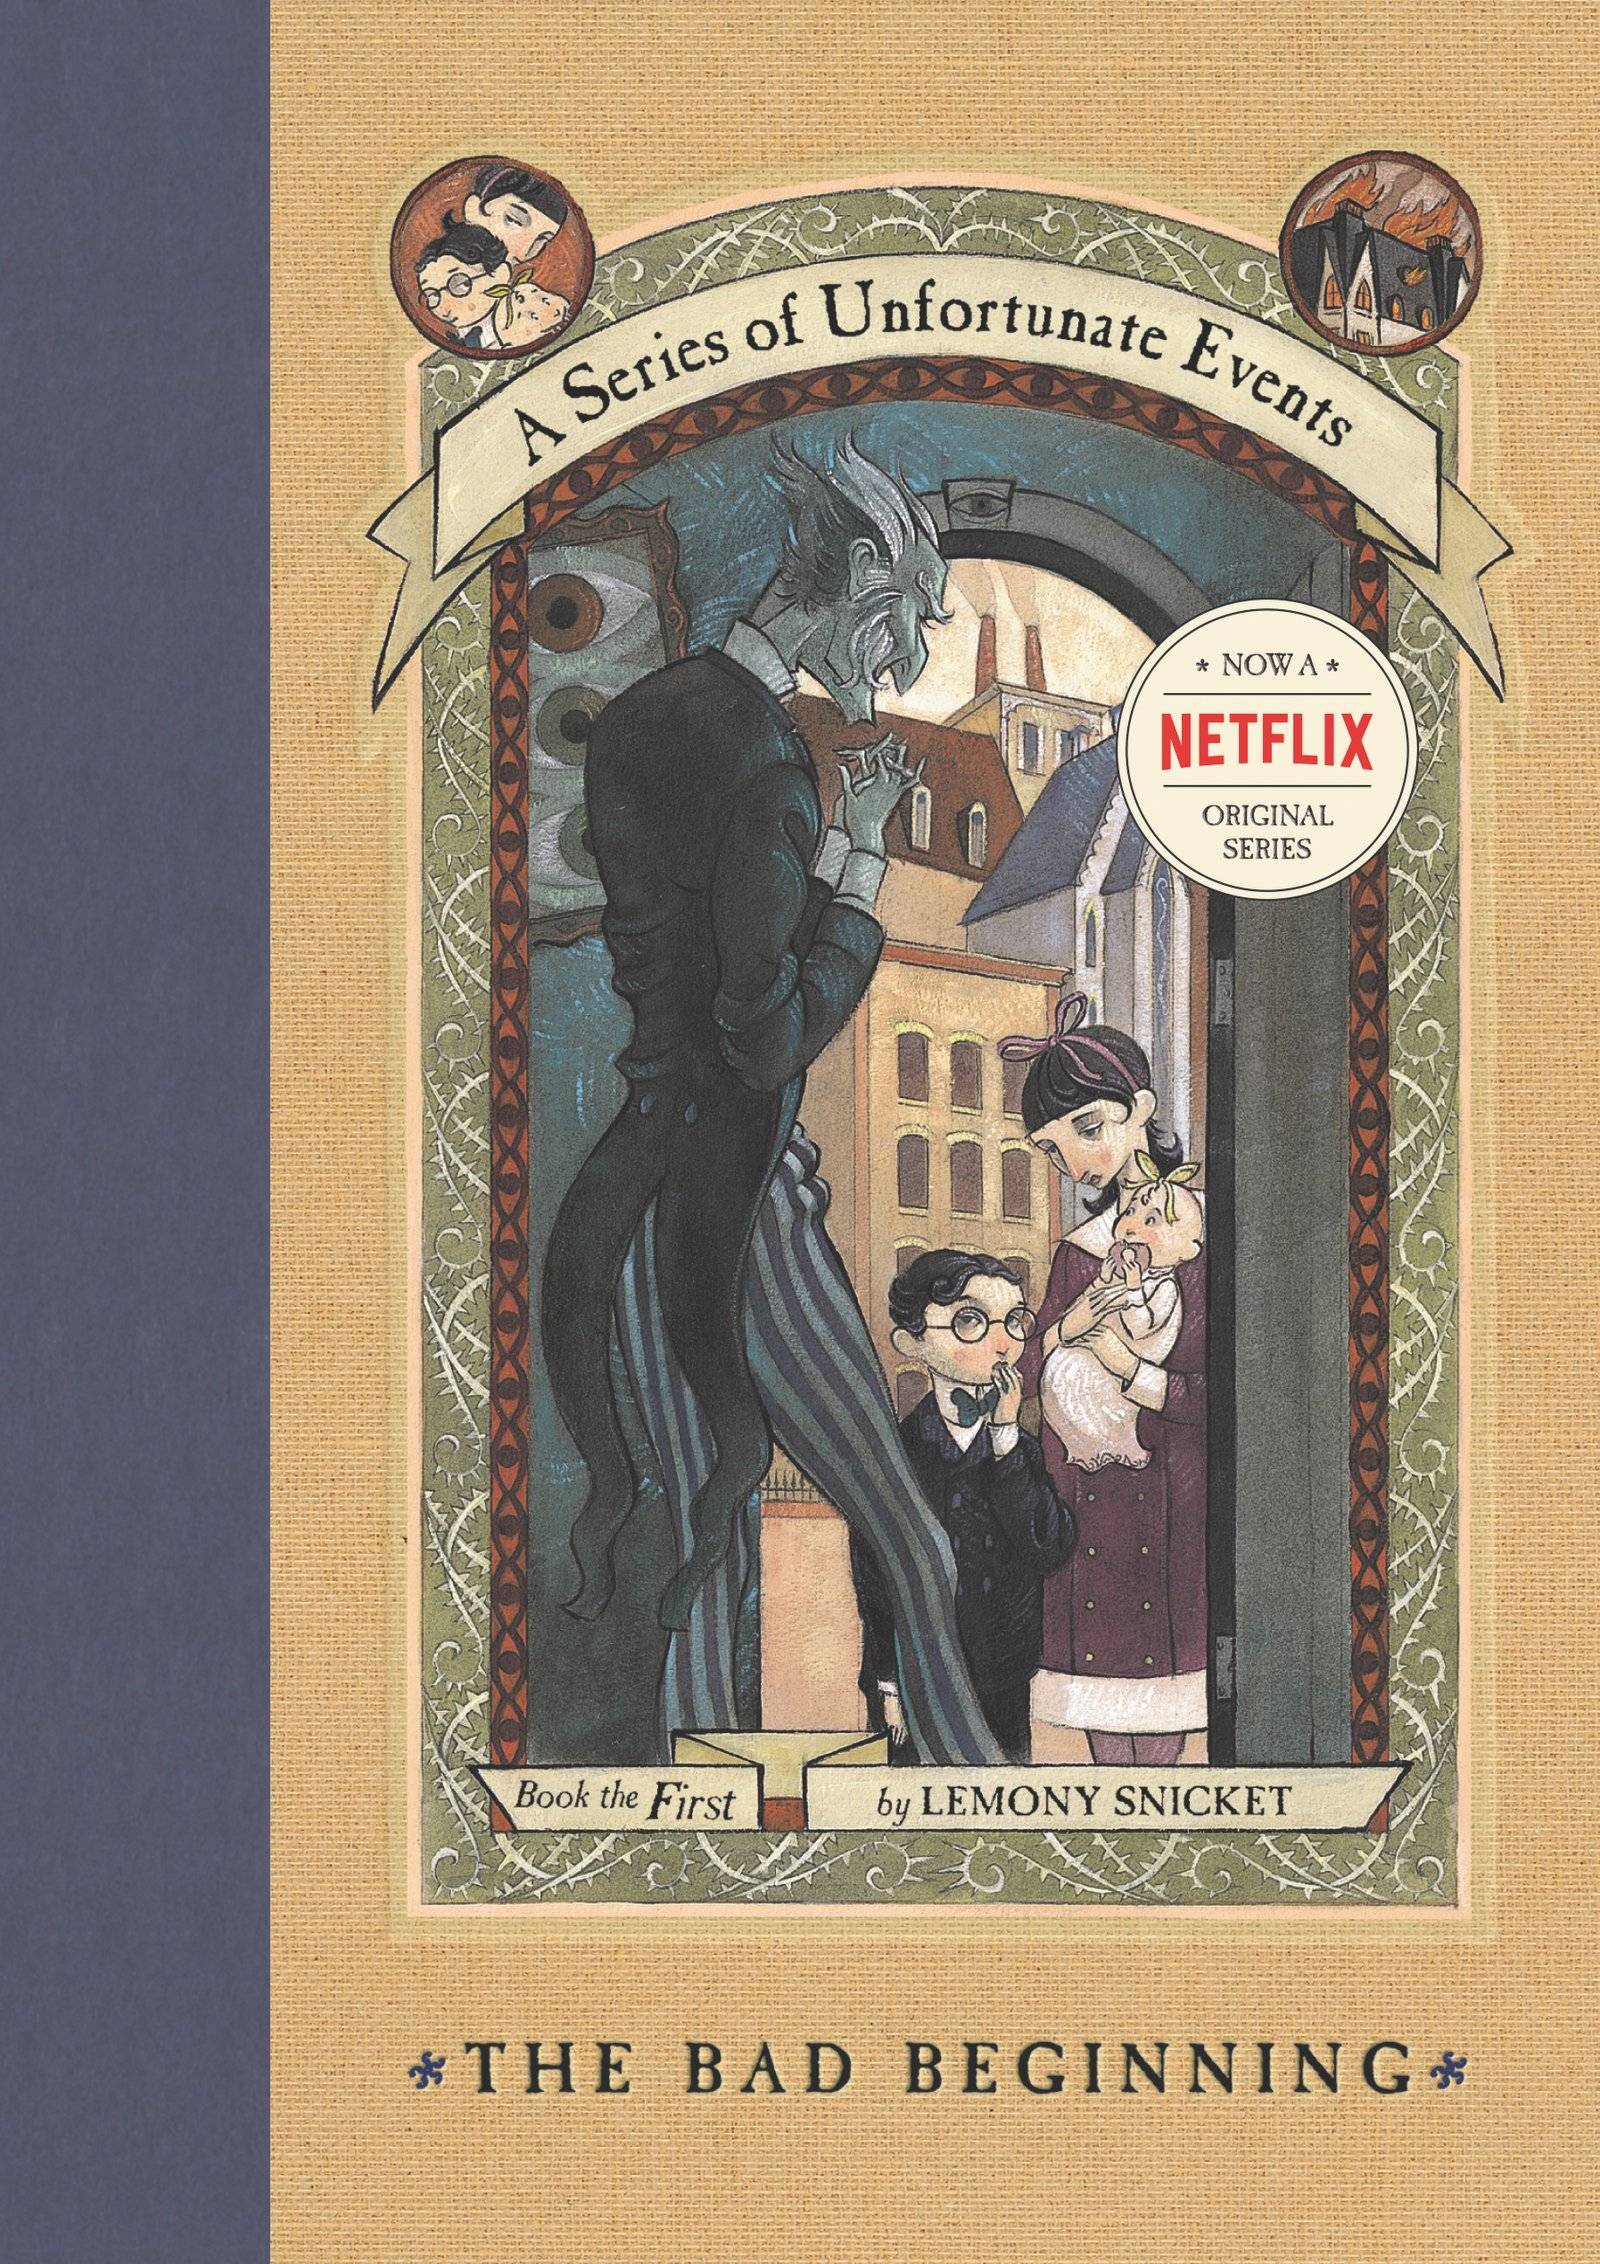 IMG : The Series of Unfortunate Events The Bad Beginning #1